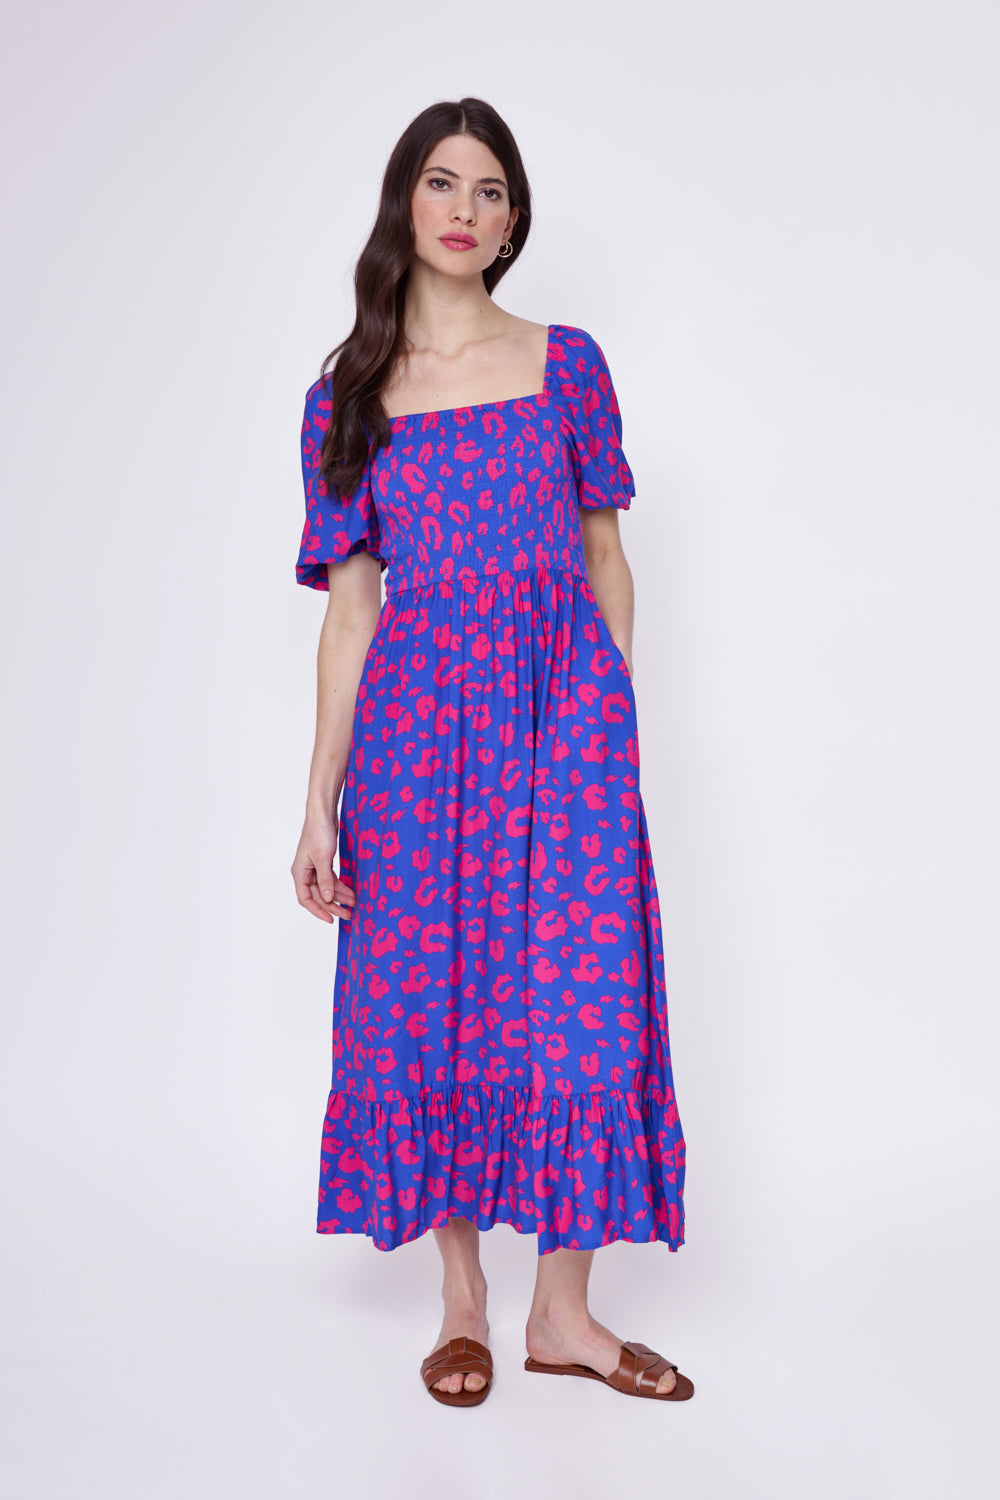 Electric Blue with Hot Pink Leopard Shirred Midi Dress